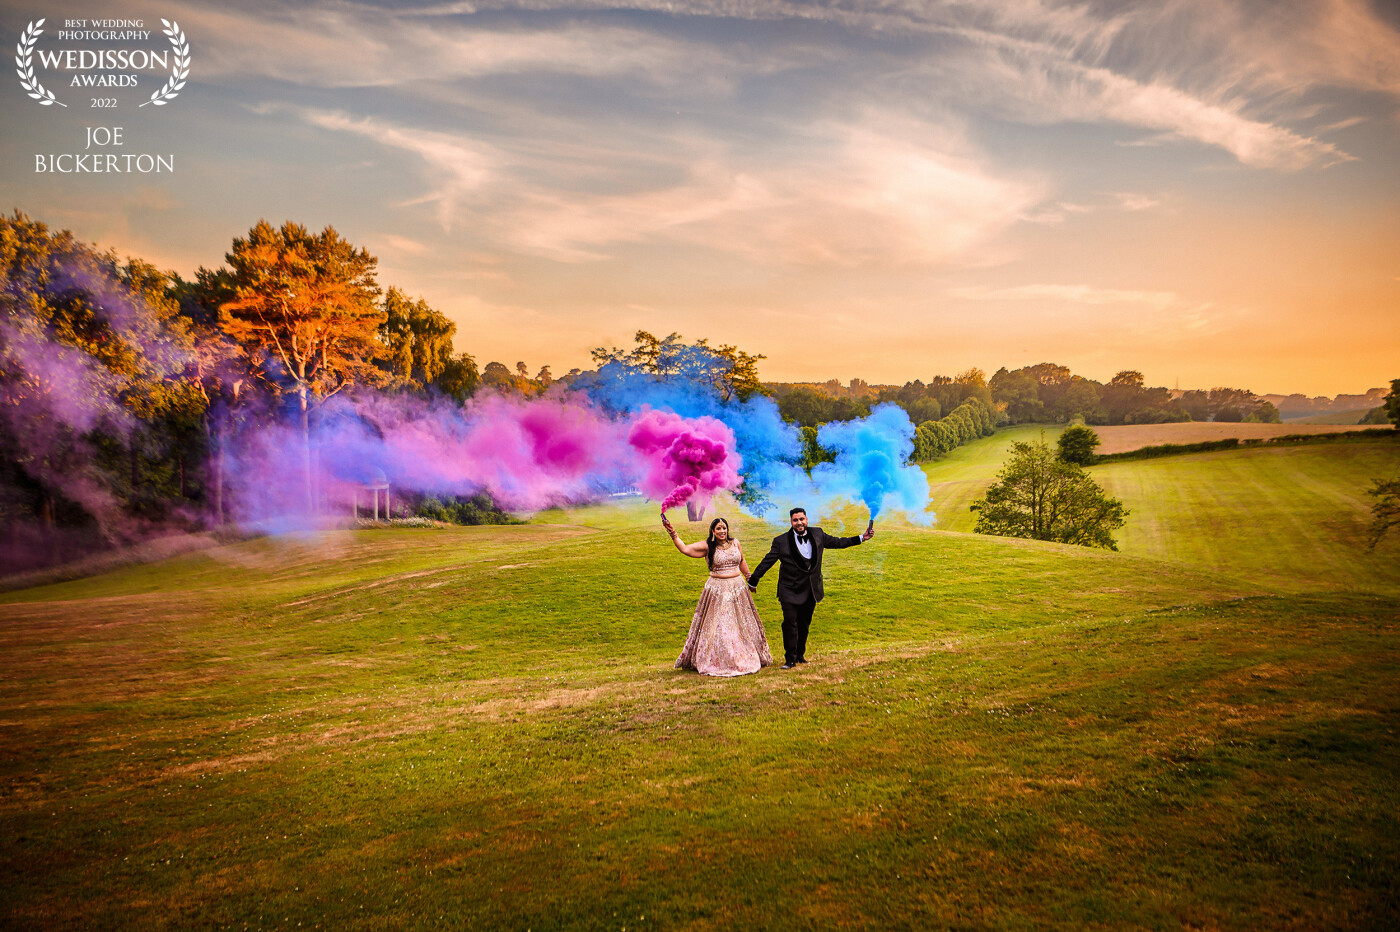 This couple celebrated their English / Indian fusion wedding at Delamere Manor in Cheshire with colourful smoke flares as golden hour started in June 2022.  Rather than shoot tightly, I used a wider 28mm lens to capture the sky and gardens at the Manor which added the the drama of the image!